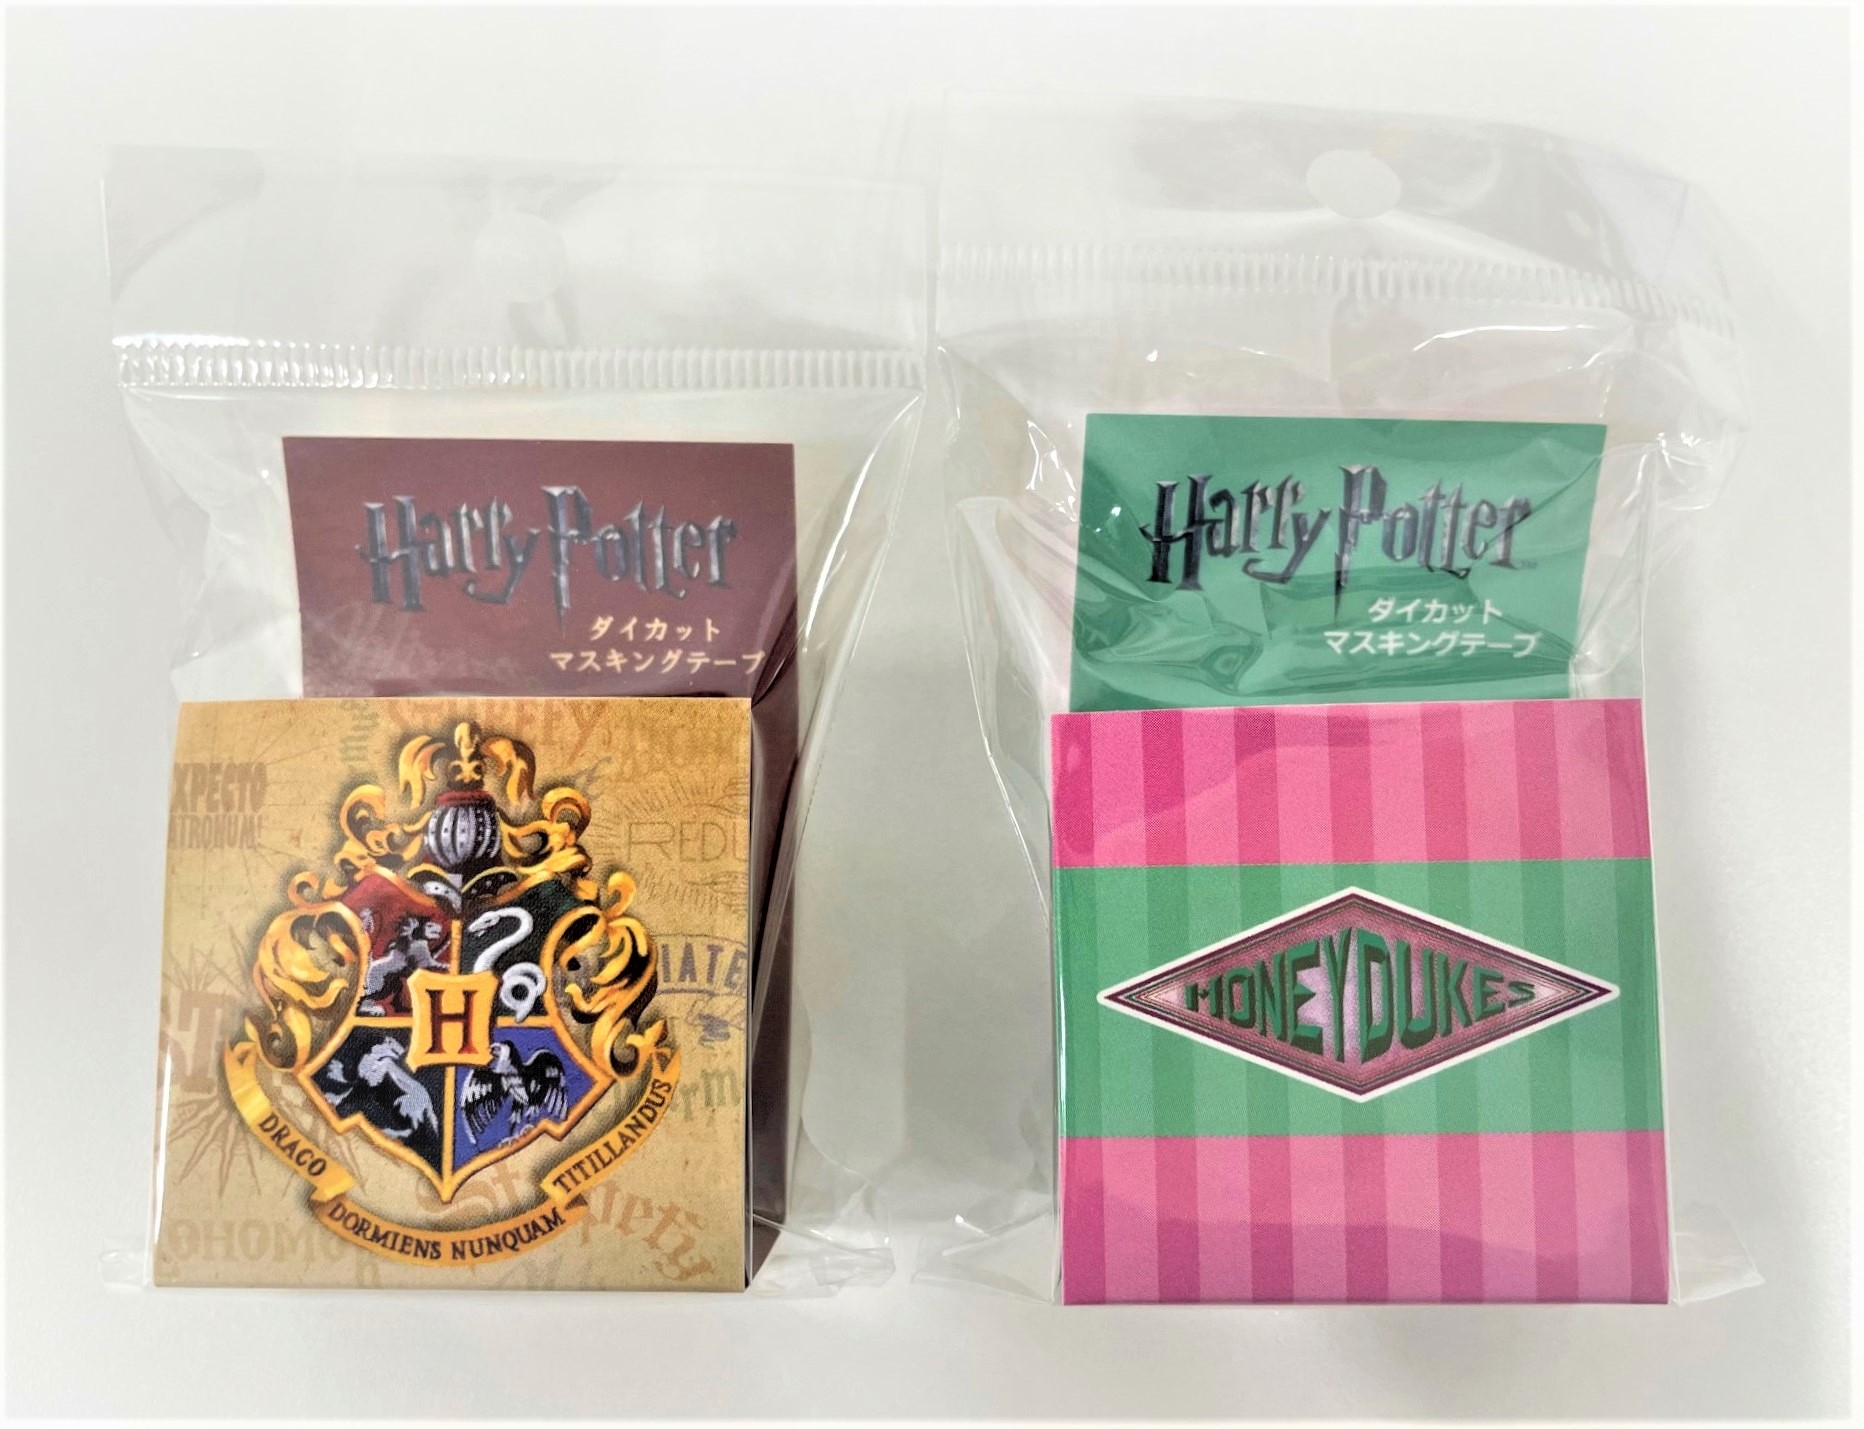 Hulu (flat monthly fee) video streaming service｜Harry Potter and the Philosopher's Stone live TV chat on Sat 9 Apr at 8pm!